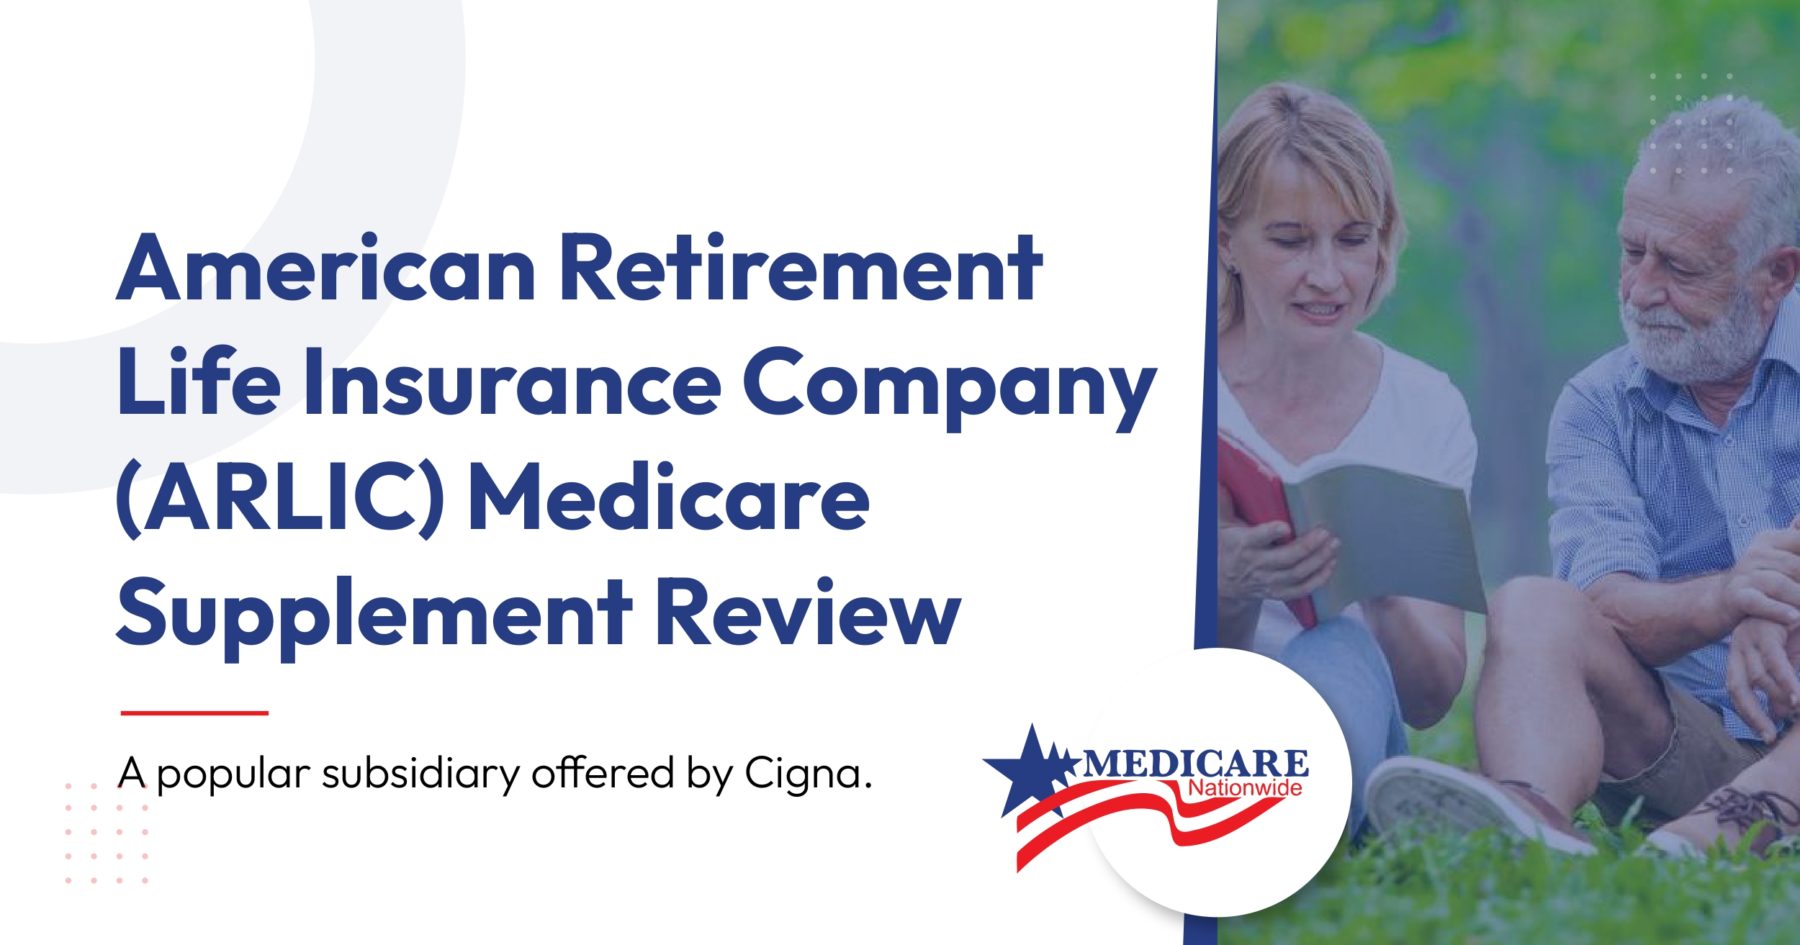 American Retirement Life Insurance Company (ARLIC) Medicare Supplement Review